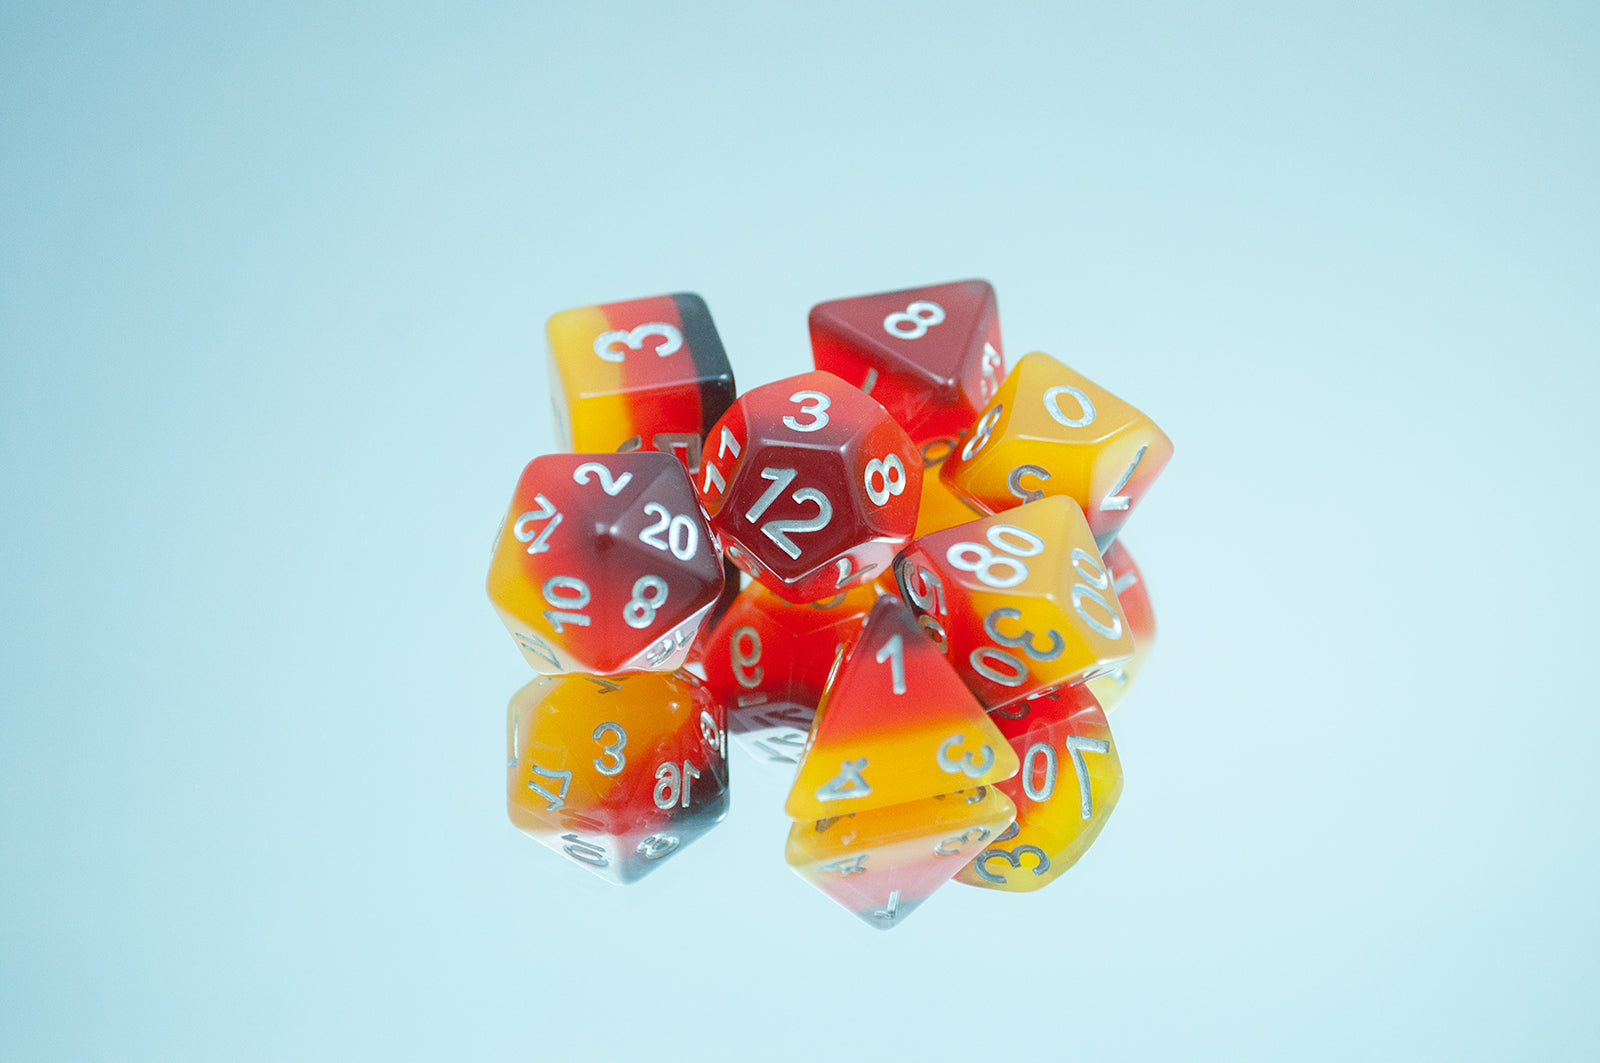 The Amber 7 piece dice set from Tabletop Loot with layers of black, red, orange, and yellow resin and silver numbering.